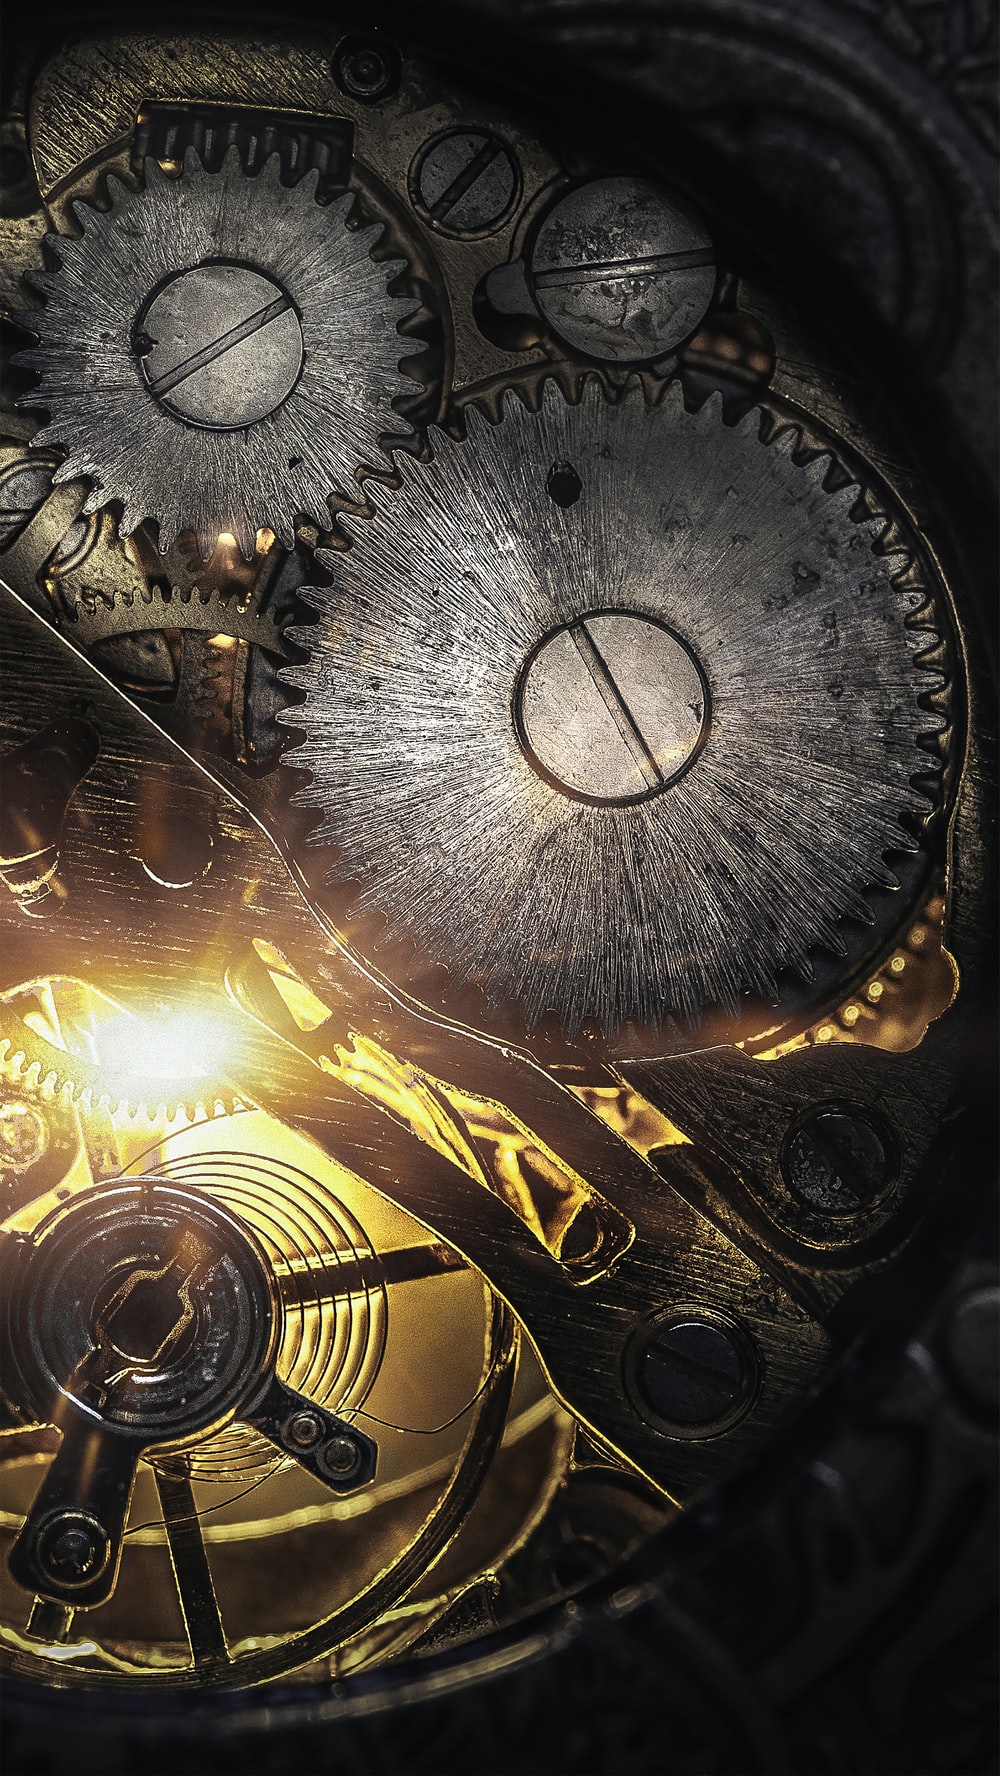 Clock Gears Picture. Download Free Image